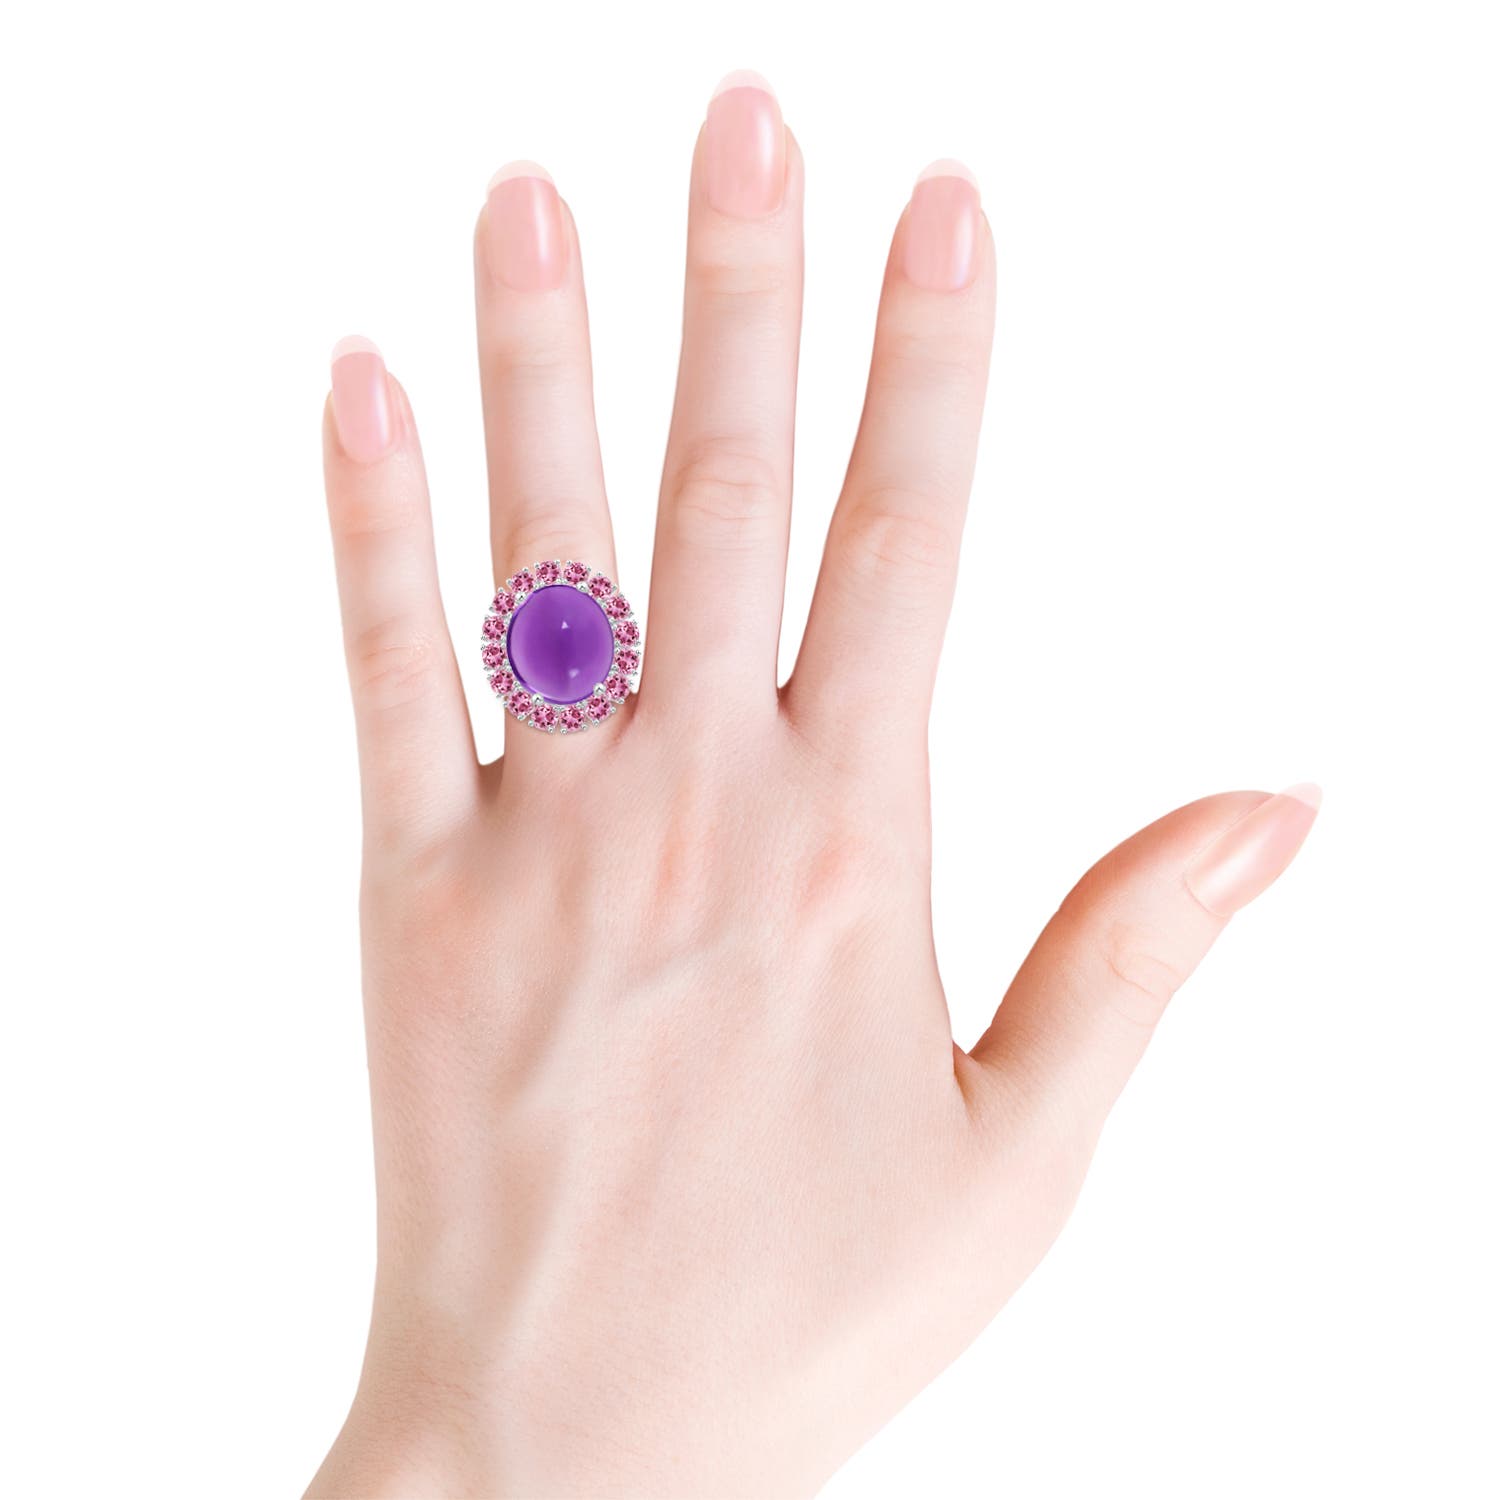 AAA - Amethyst / 13.56 CT / 14 KT White Gold